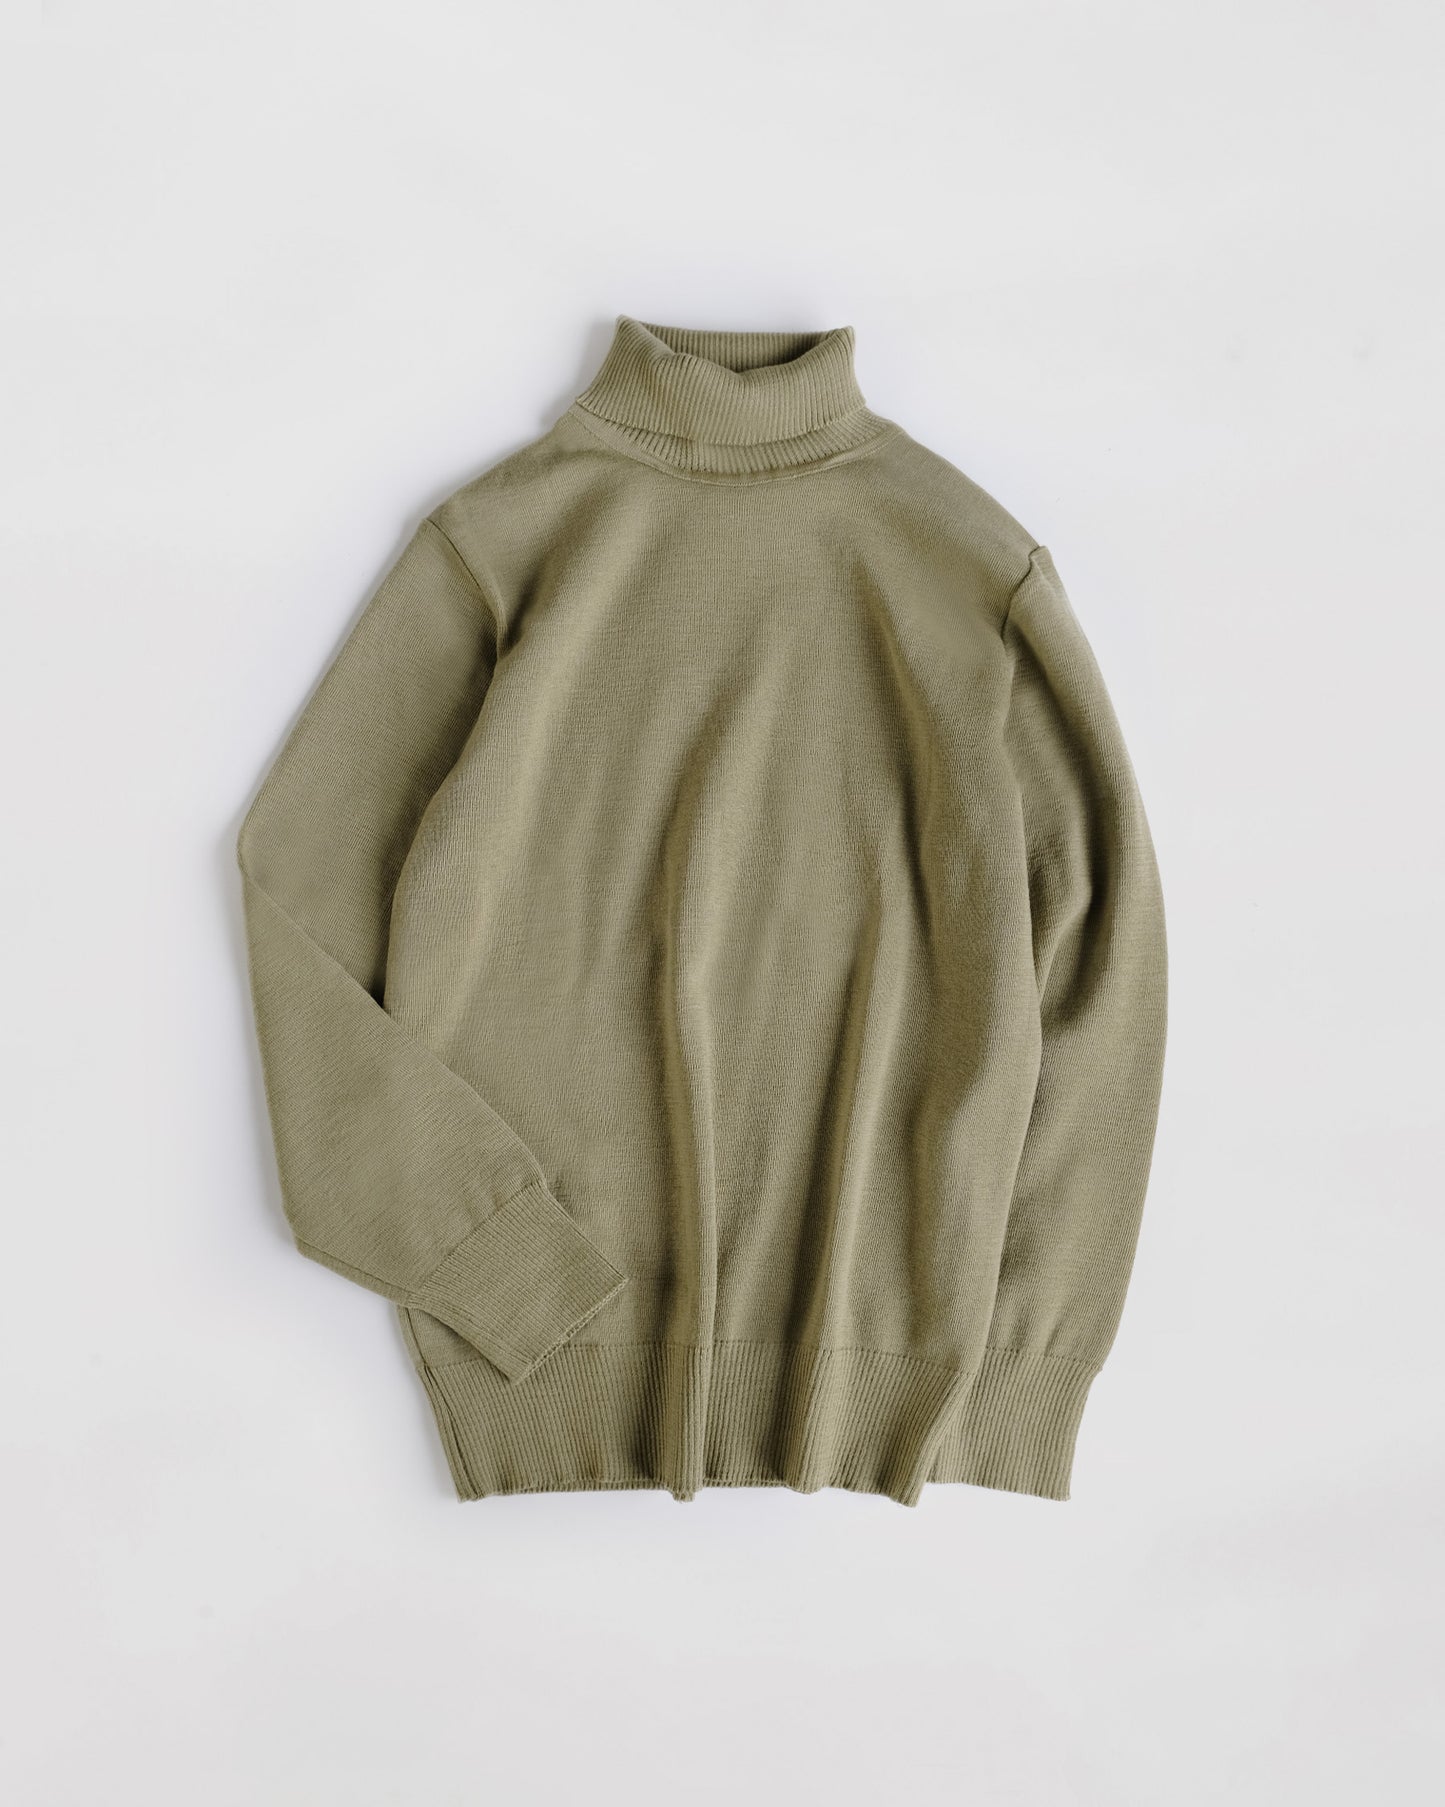 TURTLE NECK SWEATER / GERMANY